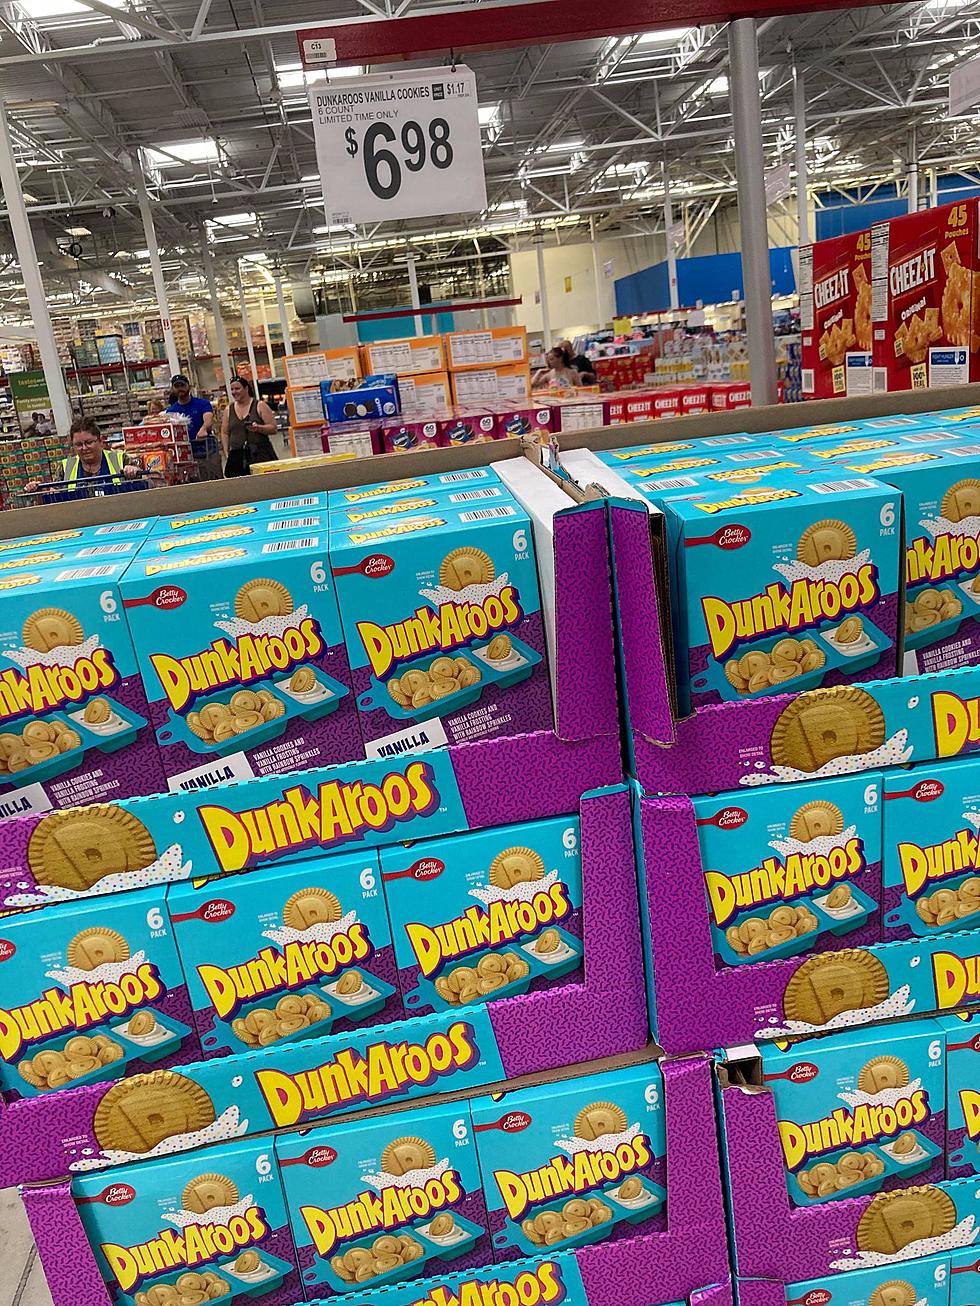 Sartell Sam’s Club Selling DunkAroos For Limited Time Only